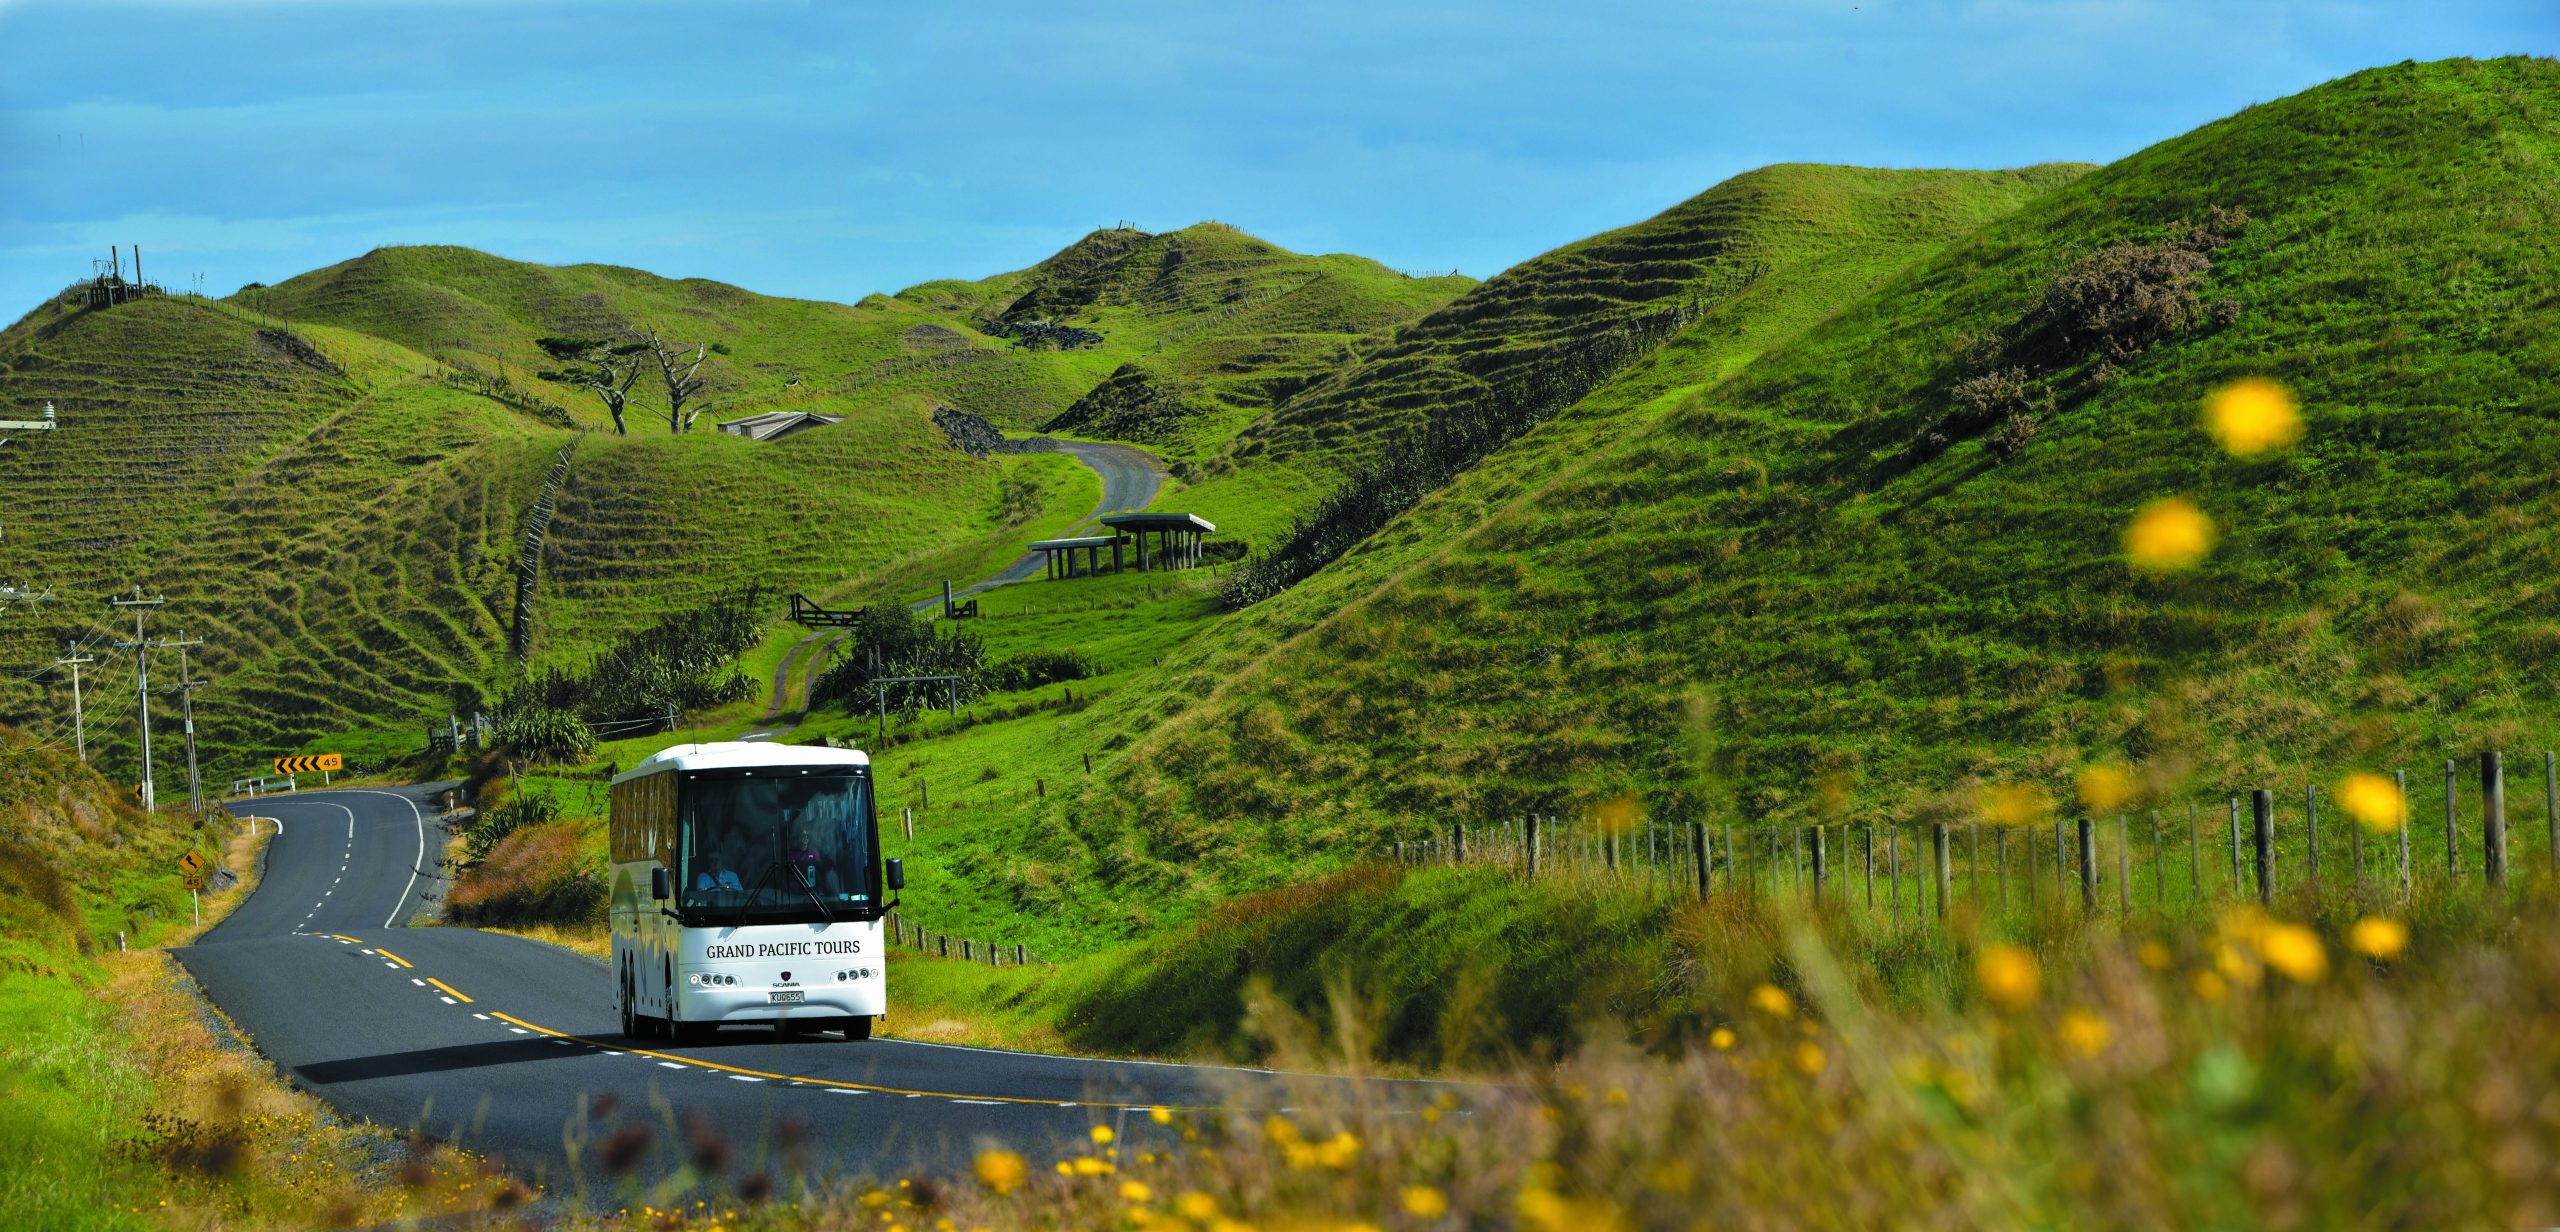 grand pacific tours nz